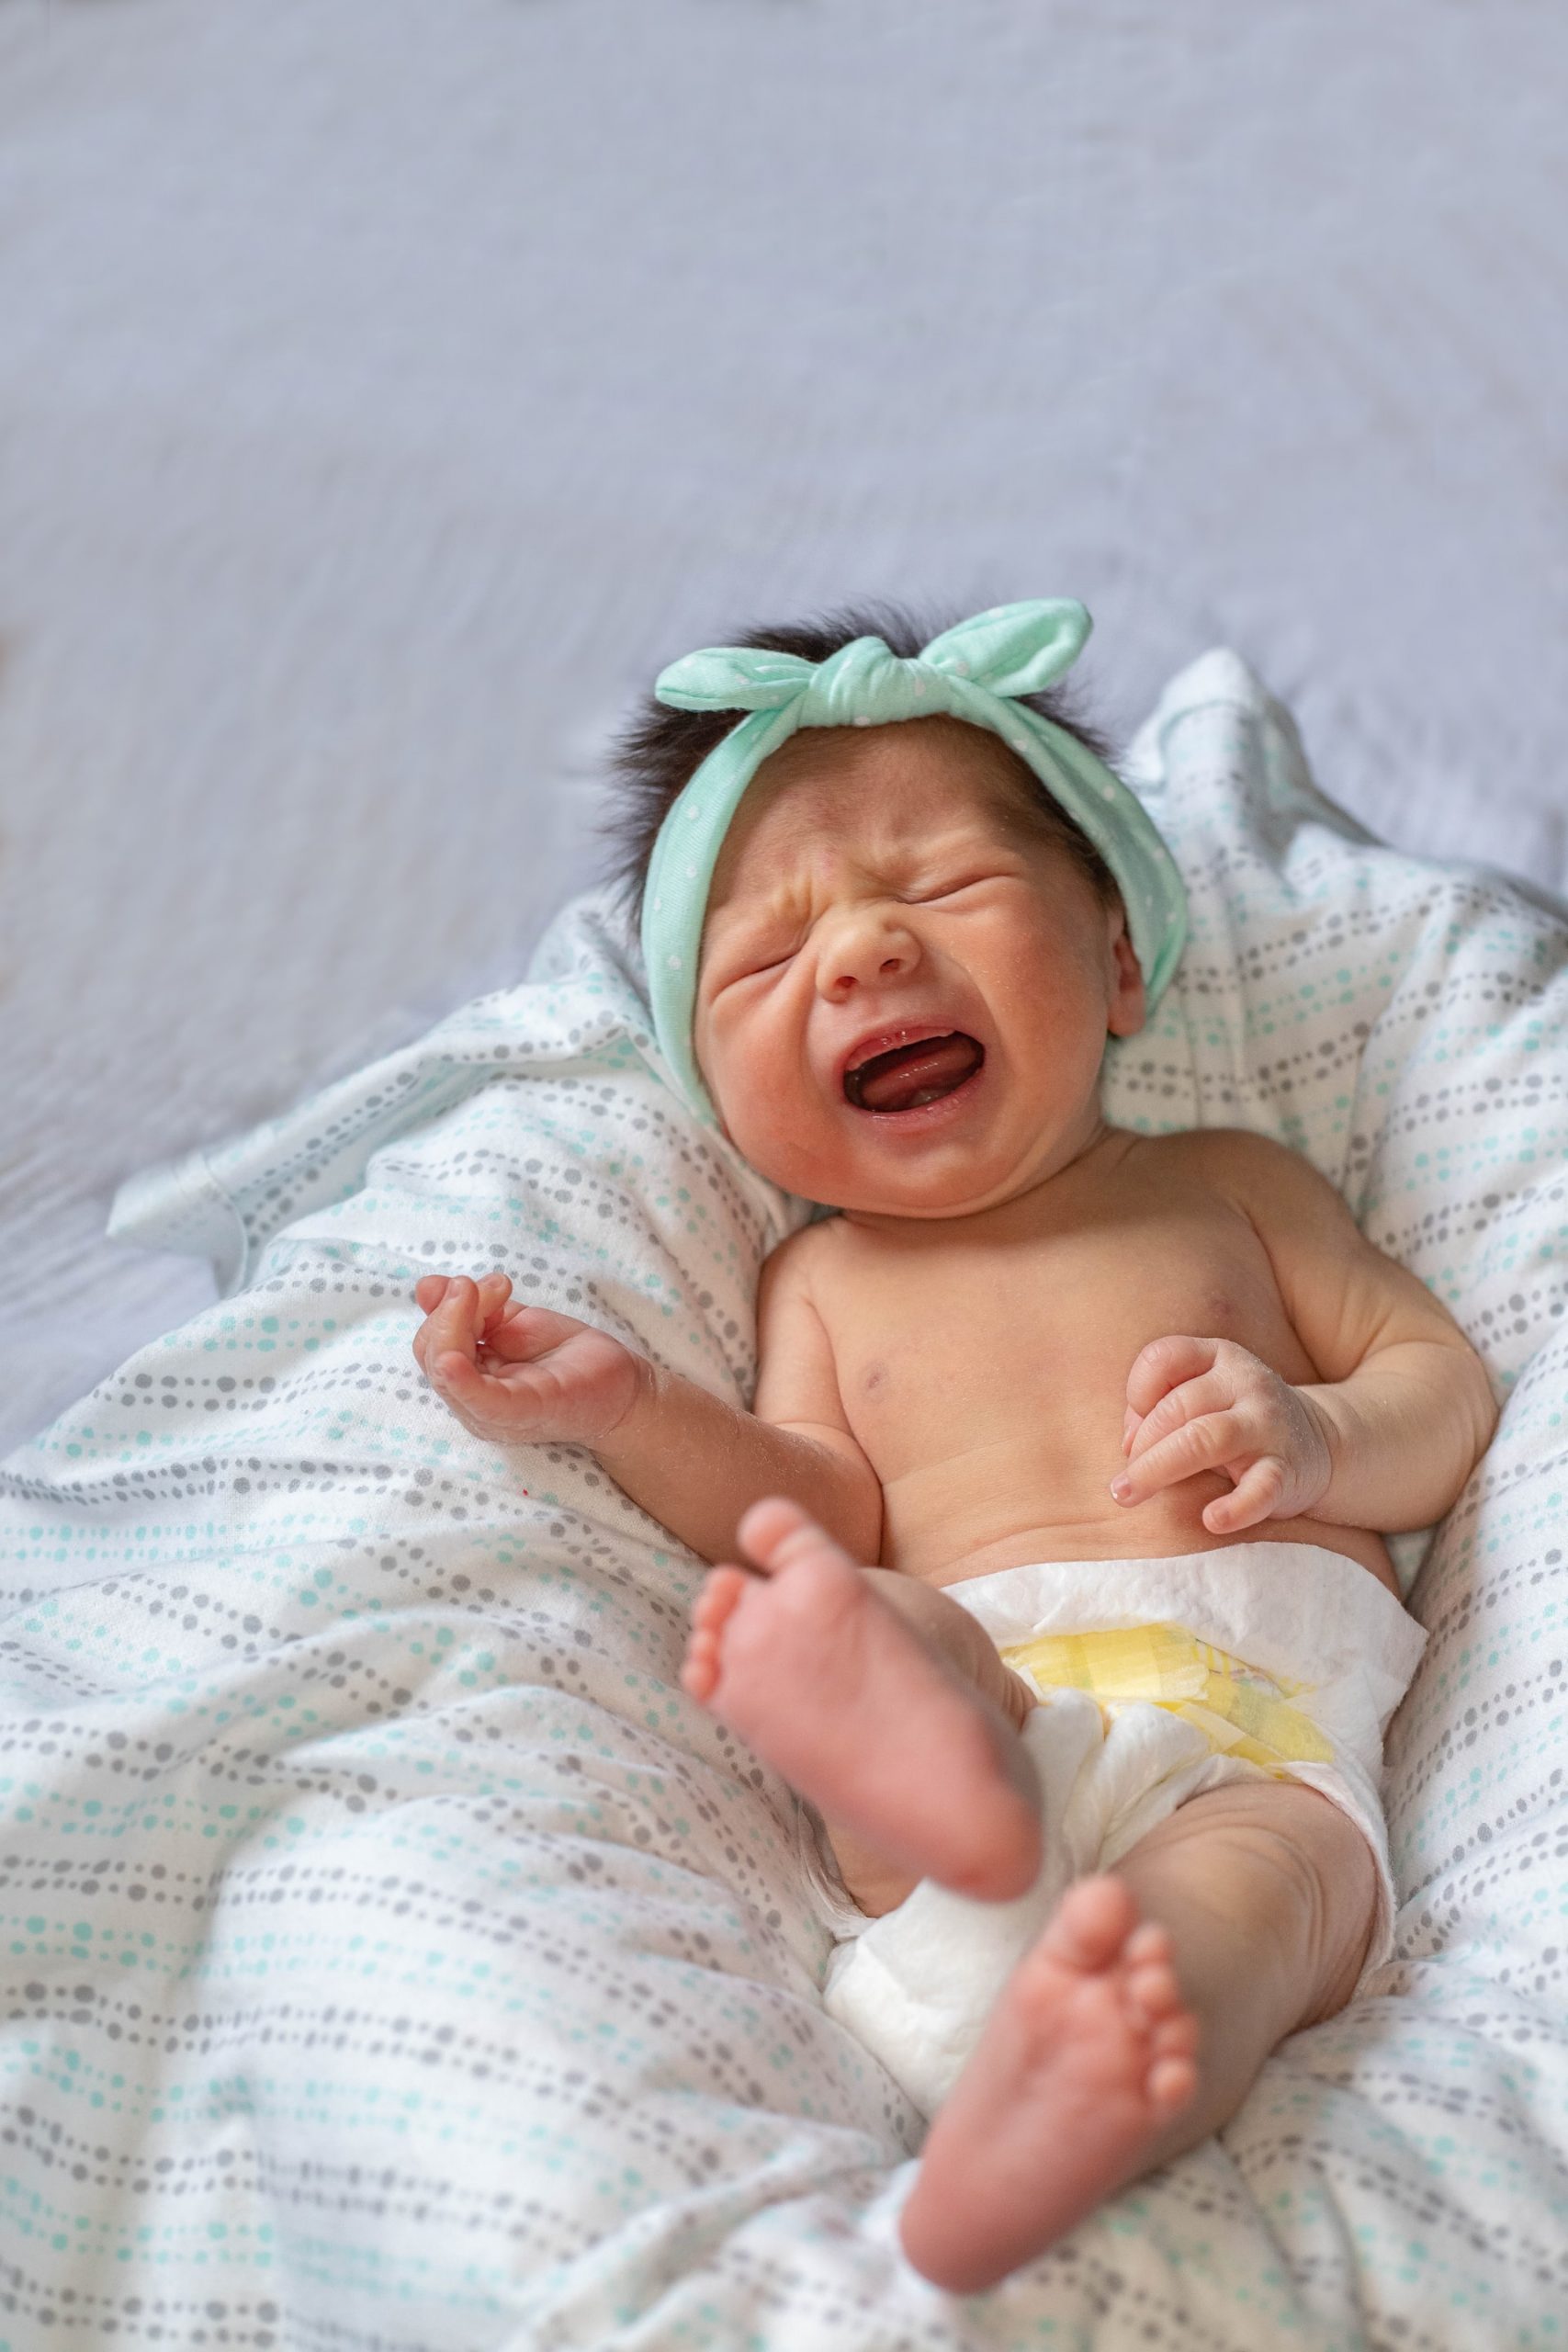 colic in babies, colicky babies, crying babies